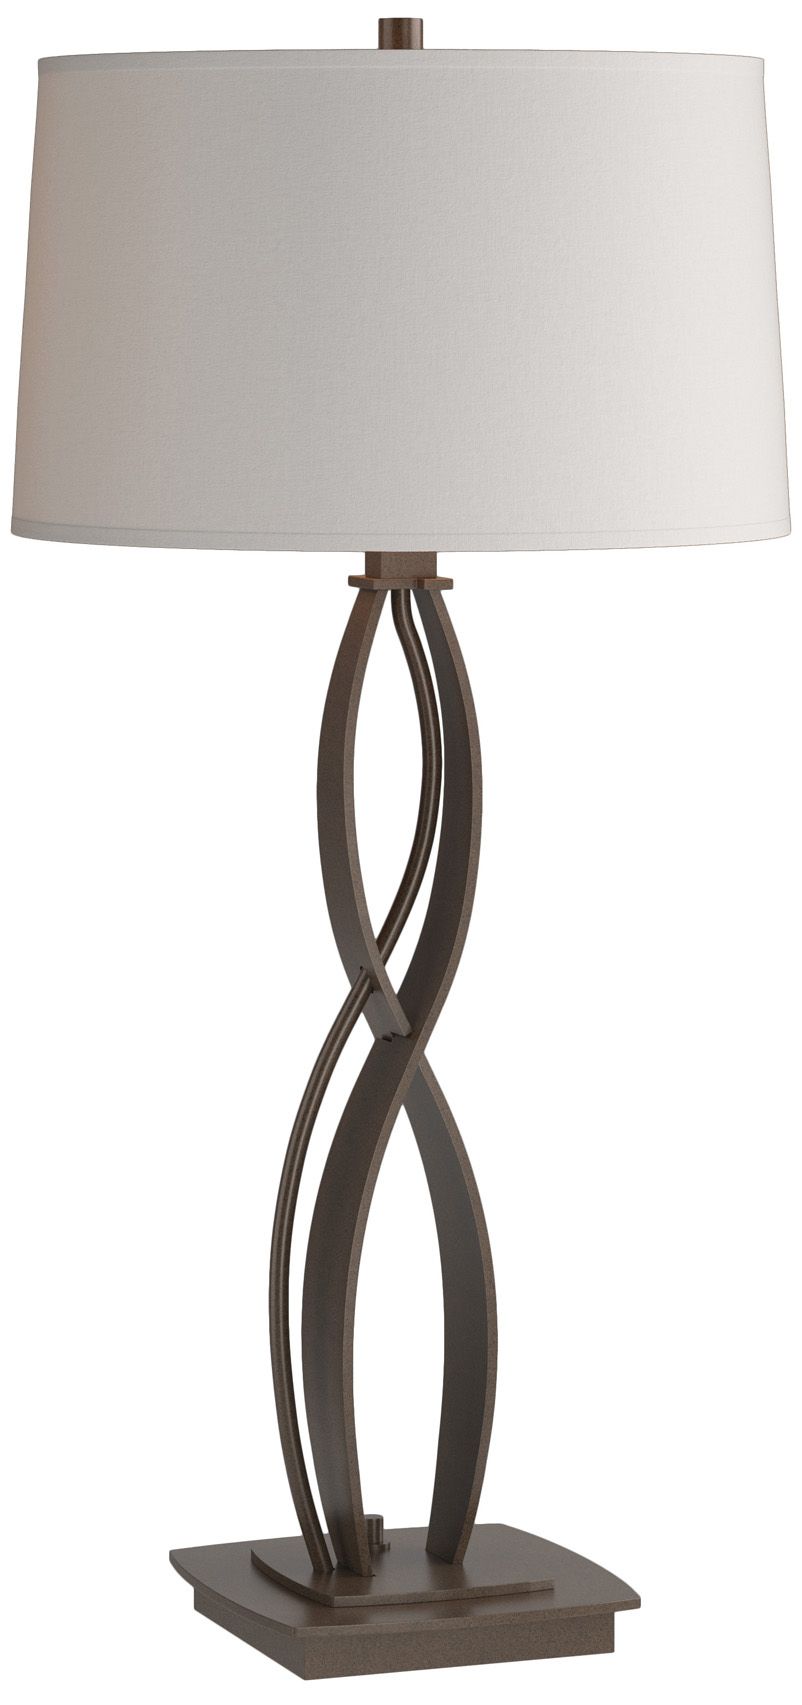 Almost Infinity Table Lamp - Bronze Finish - Flax Shade